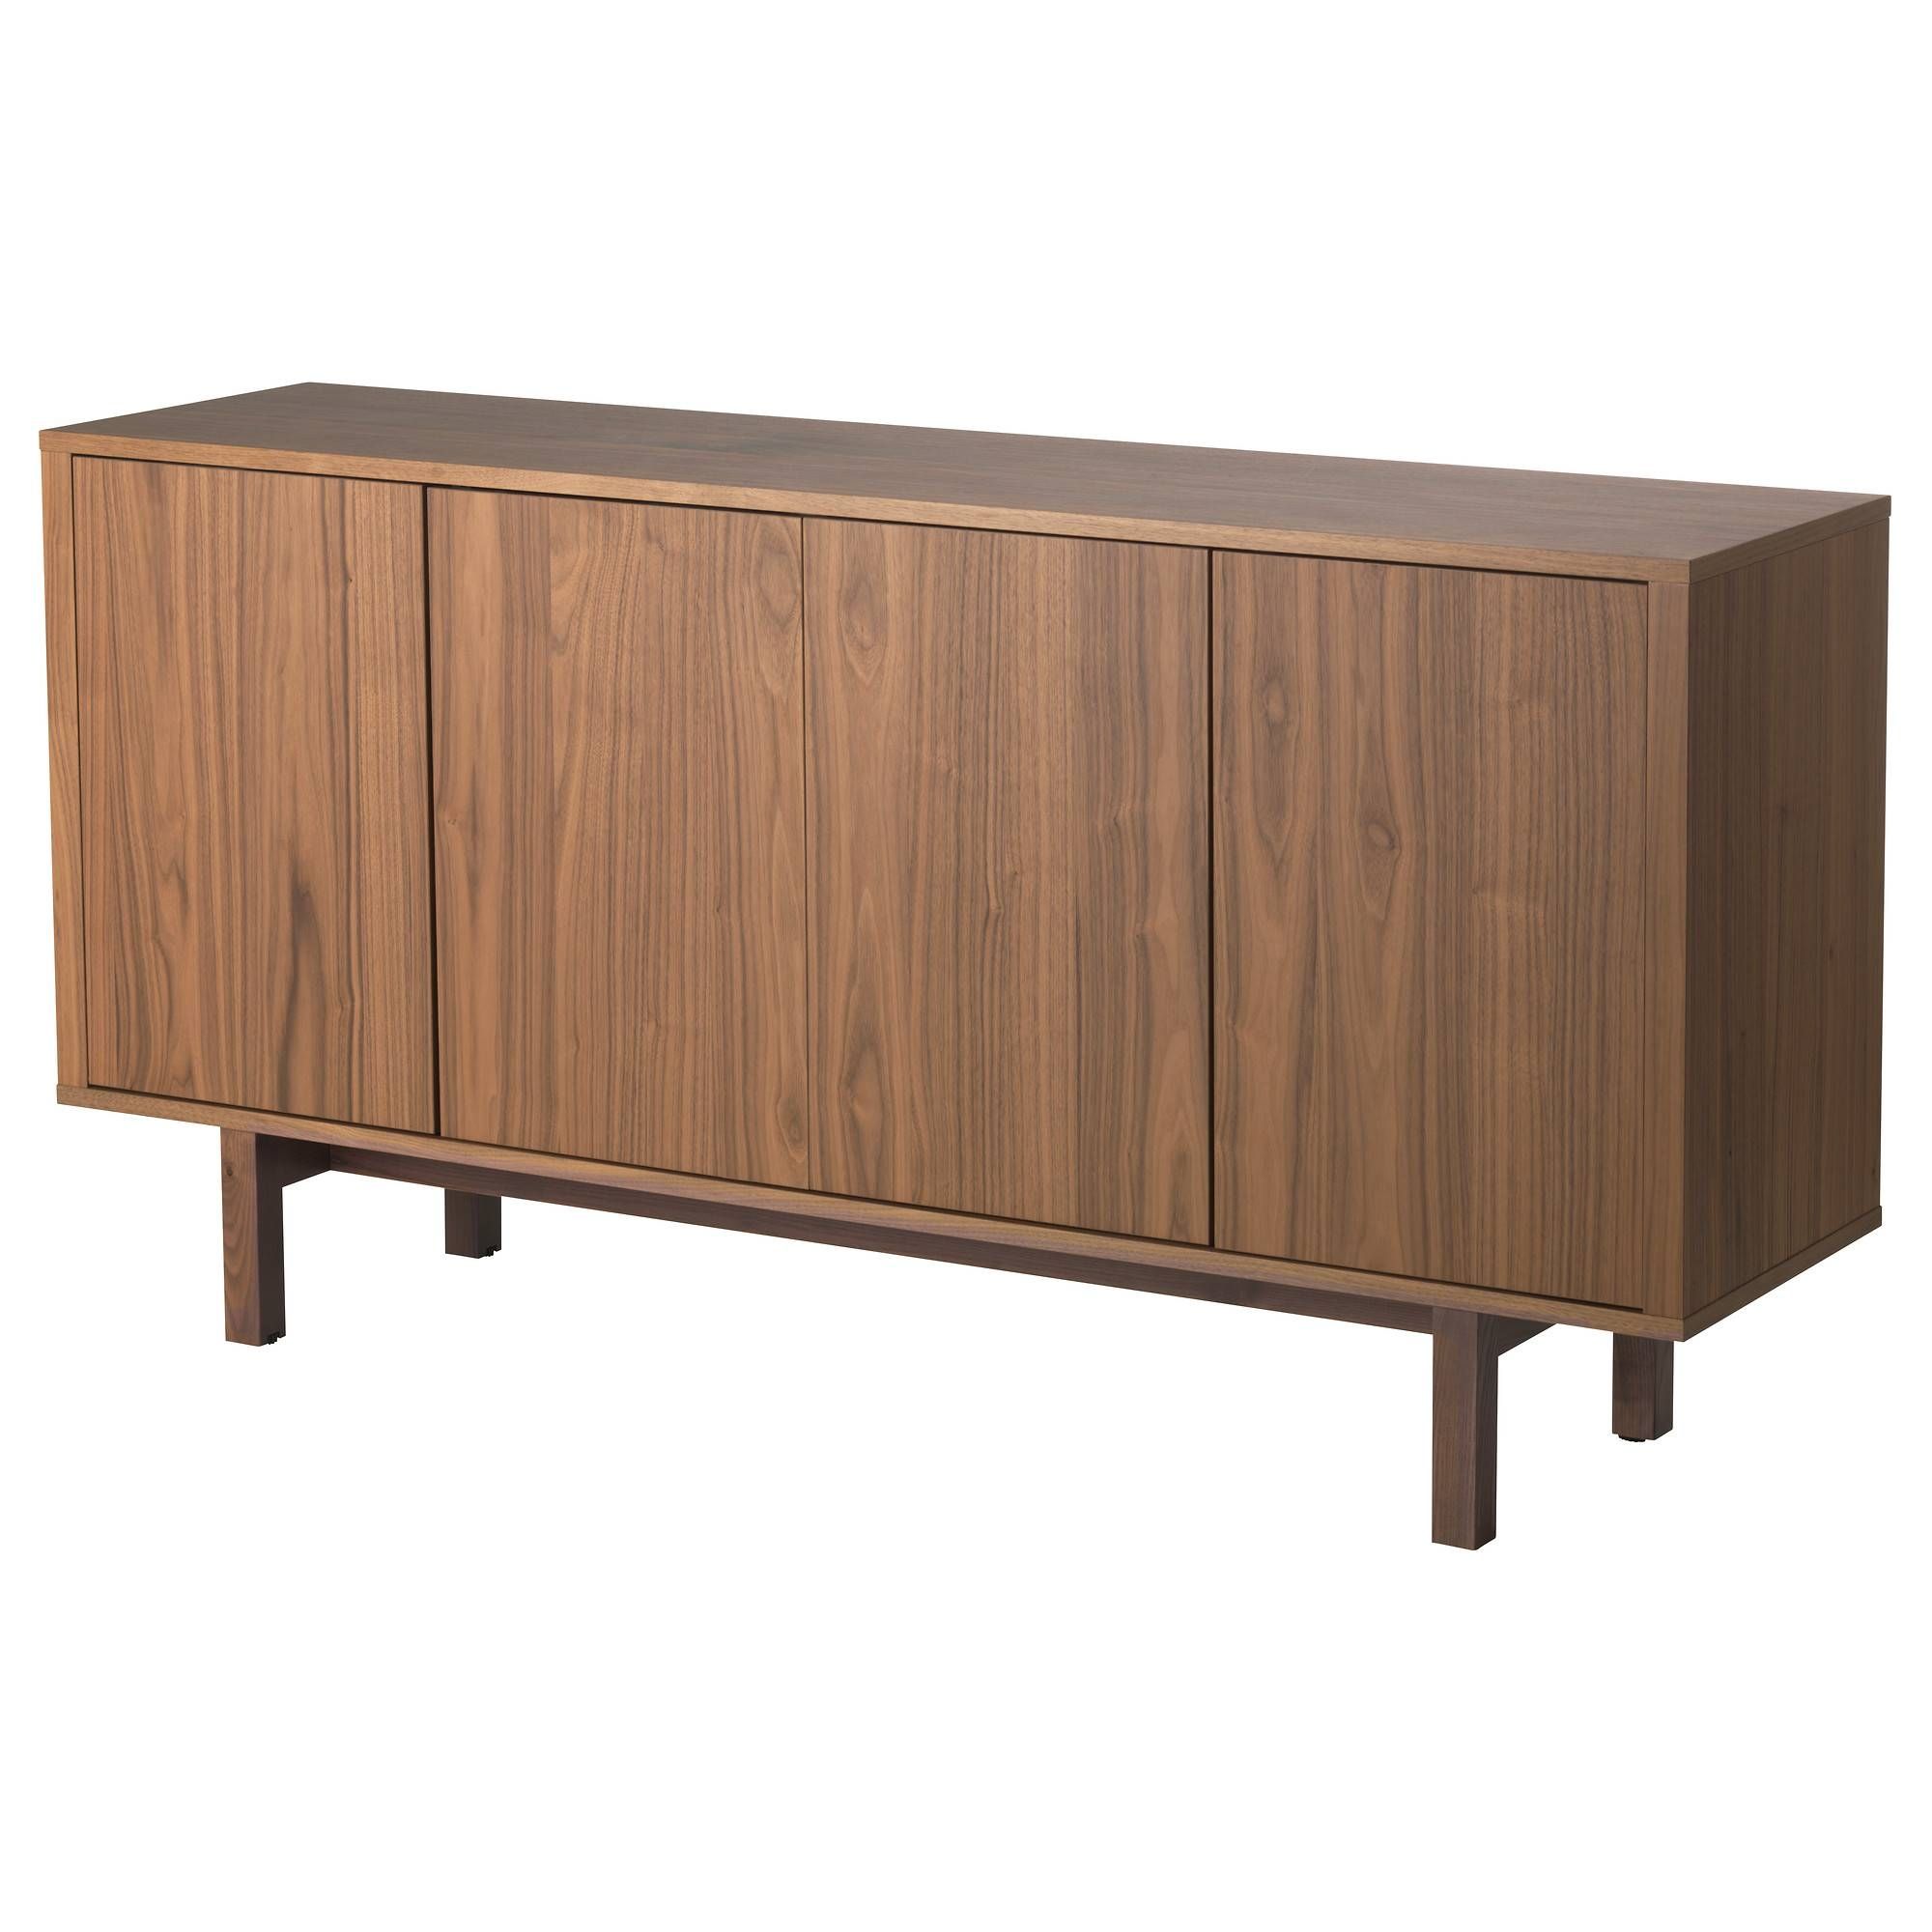 Stockholm Sideboard – Ikea Inside Most Up To Date Sideboards And Tables (View 6 of 15)